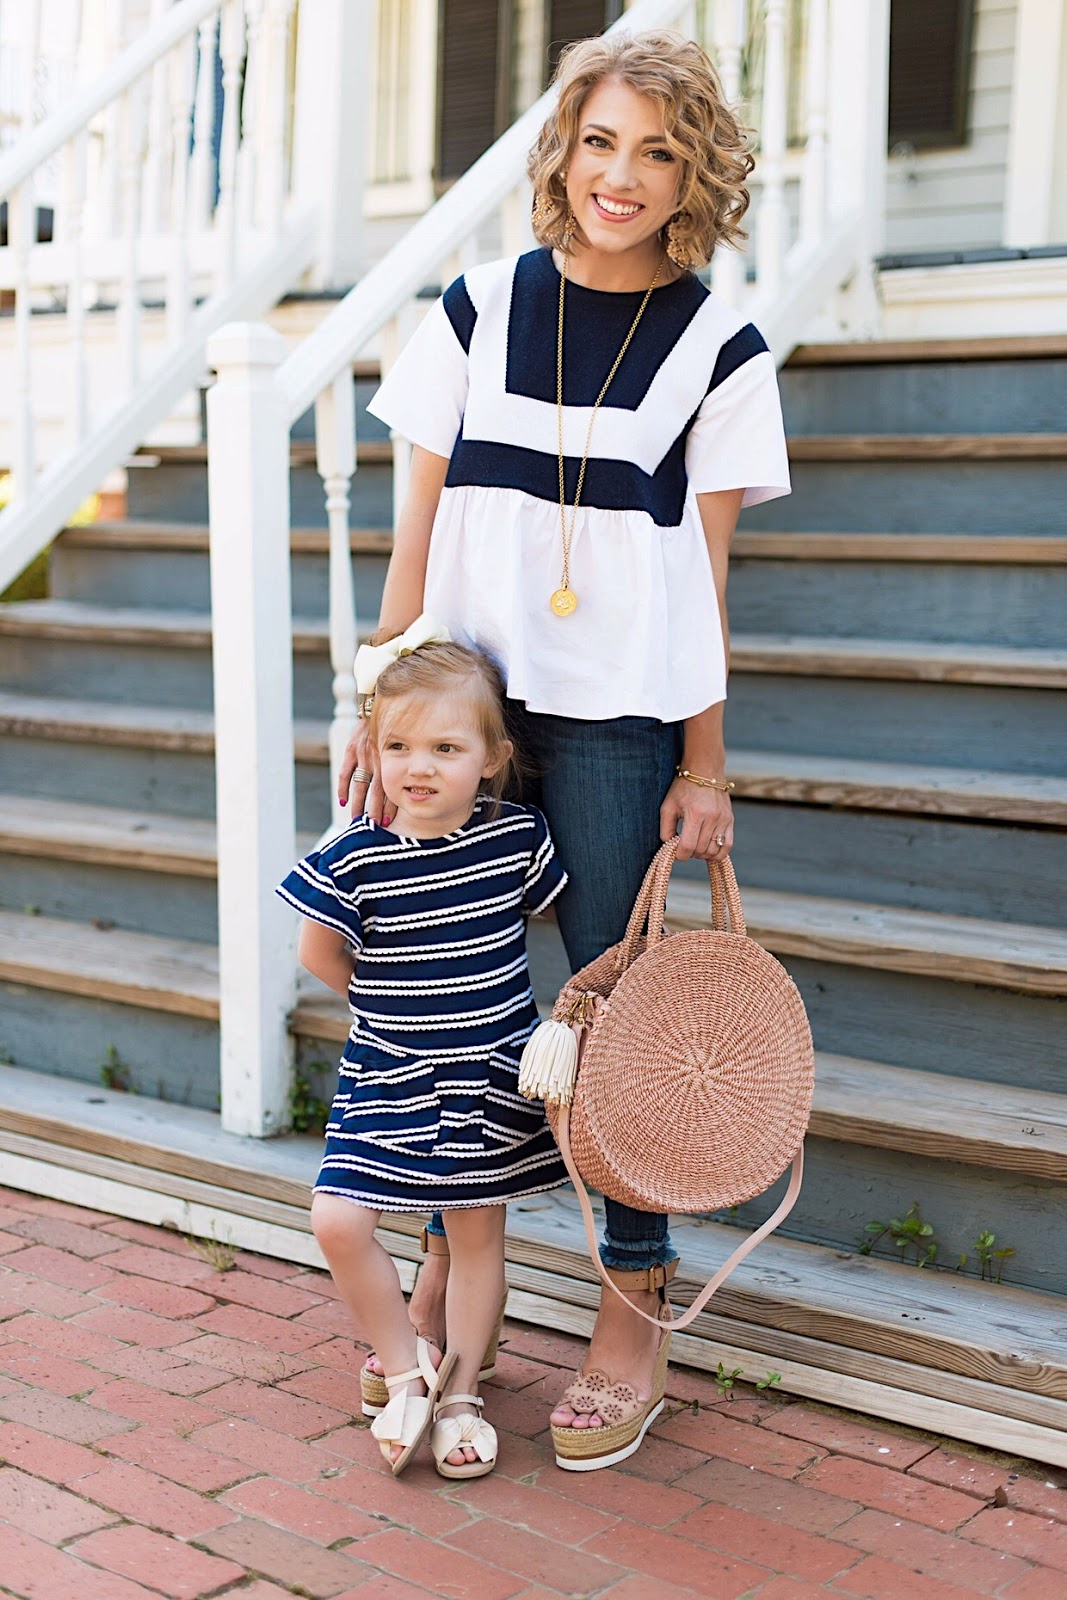 Mommy and me in navy and white - Something Delightful Blog